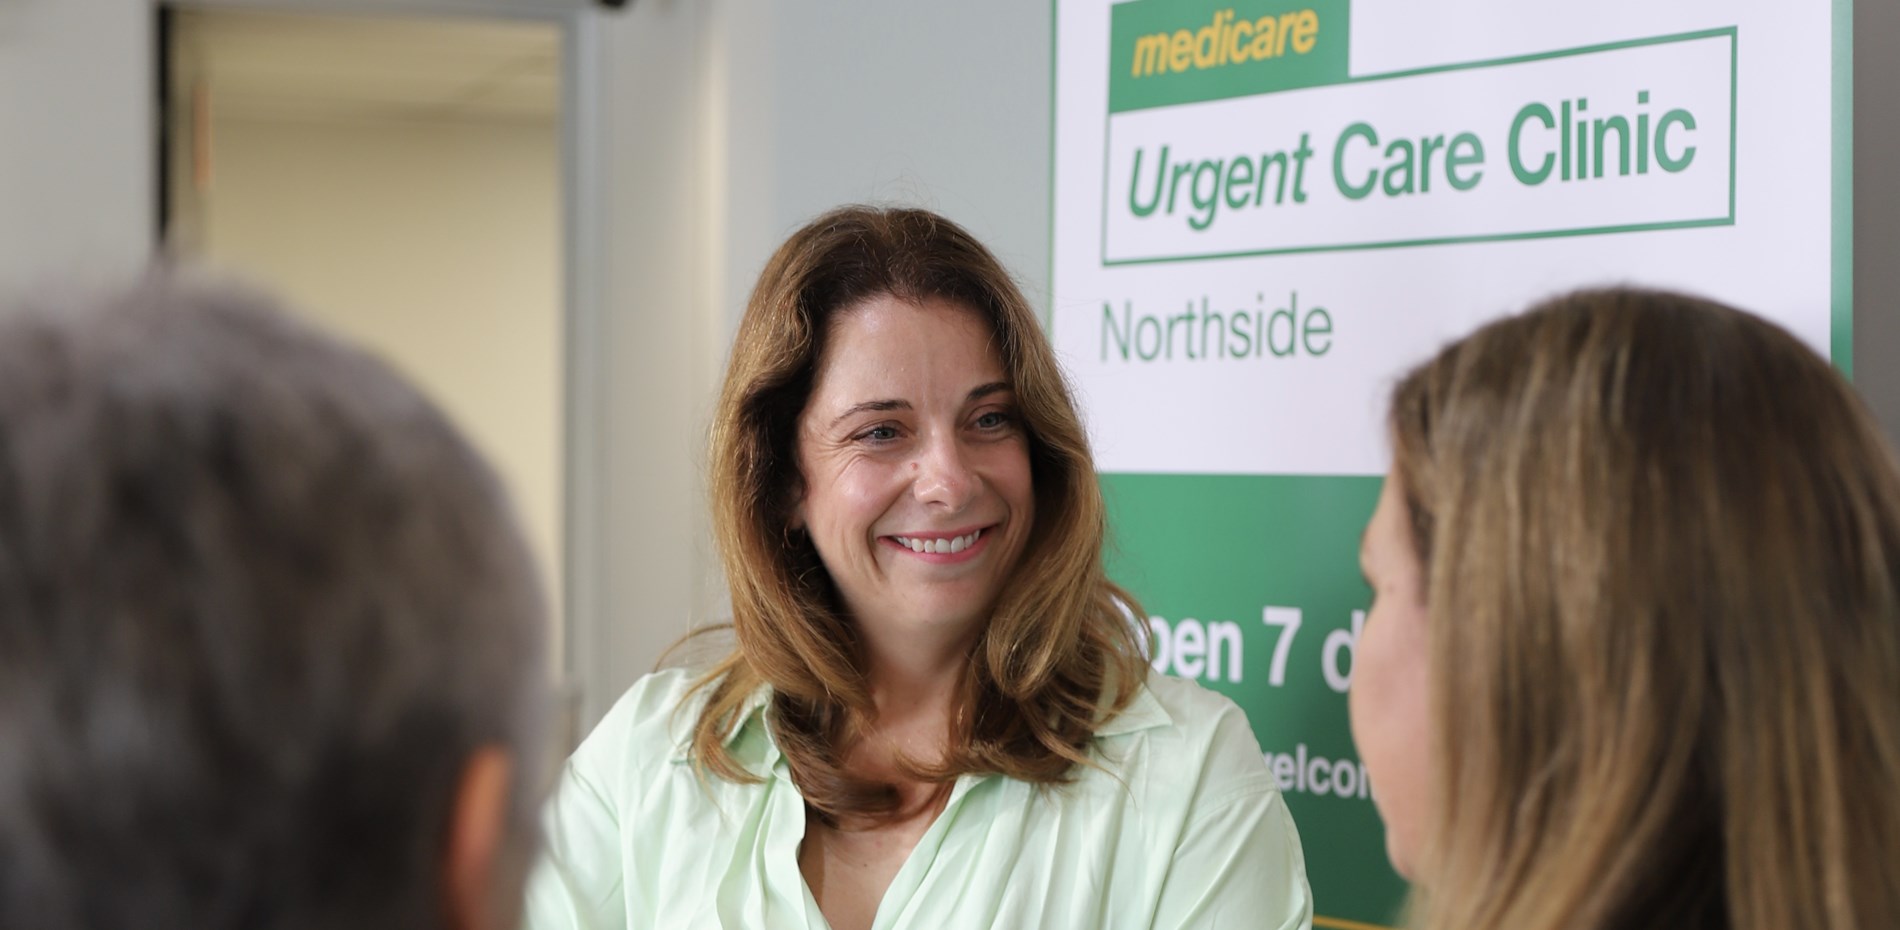 Northside Urgent Care Clinic now open Main Image